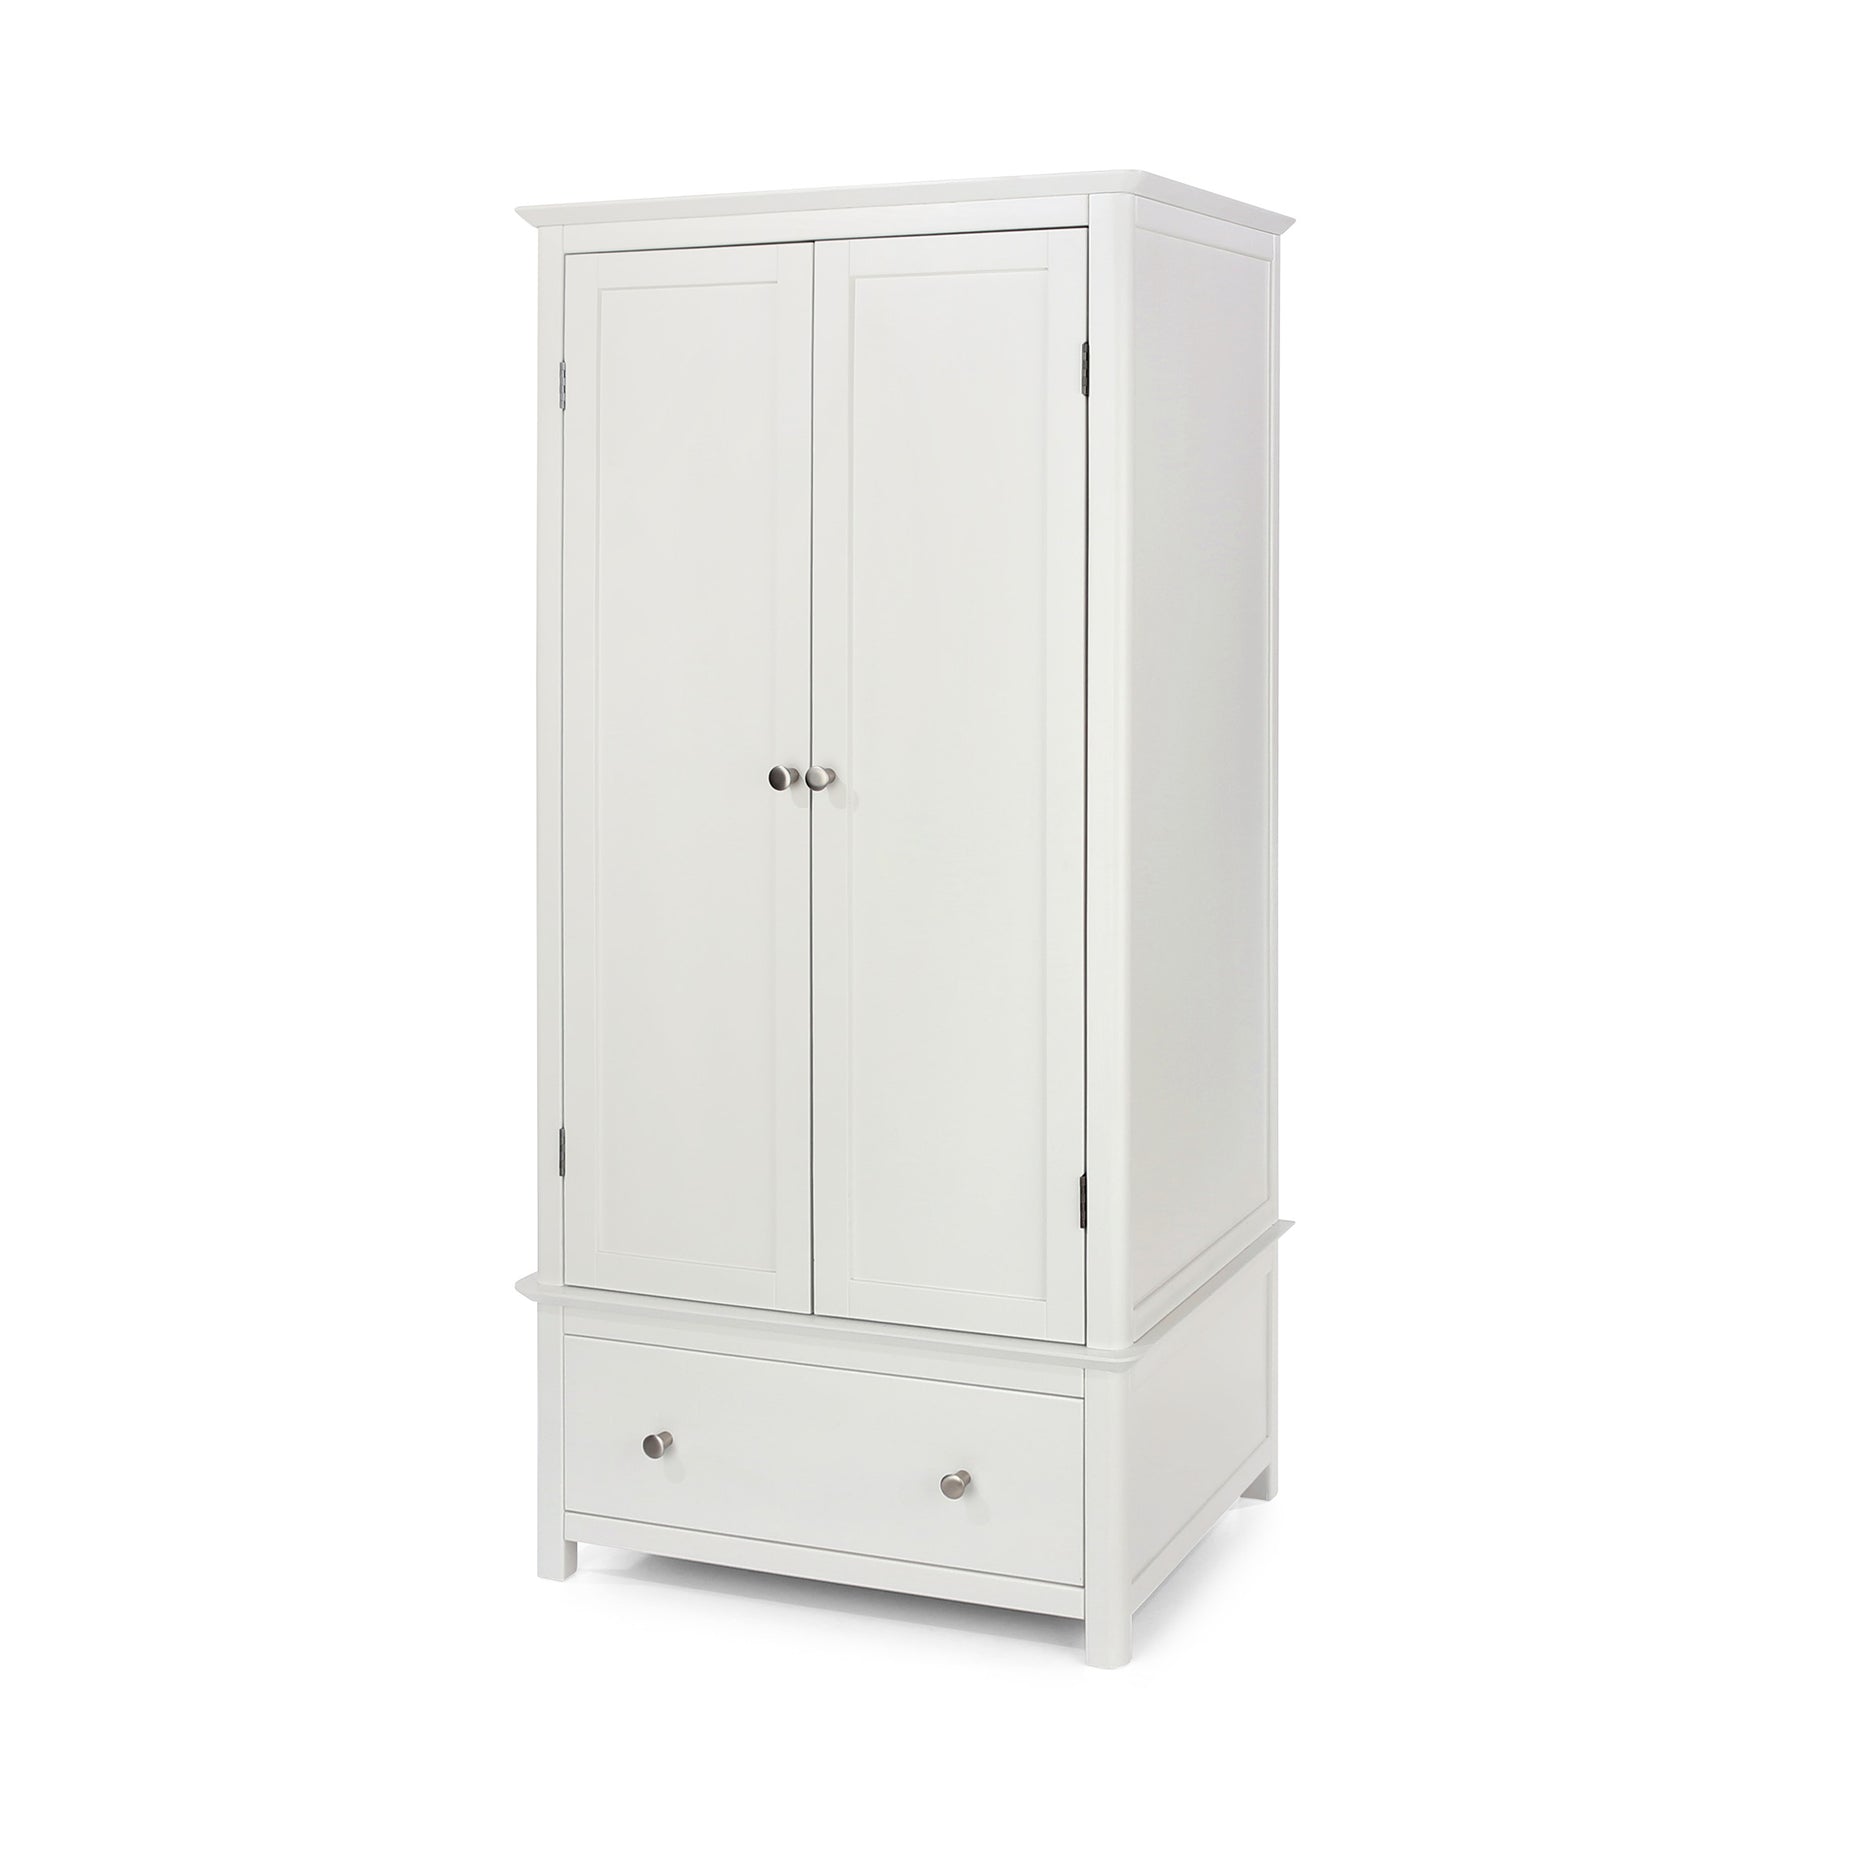 Noelia Softwood 2 Door And 1 Drawer Wardrobe For Core Products - CFD-NR281